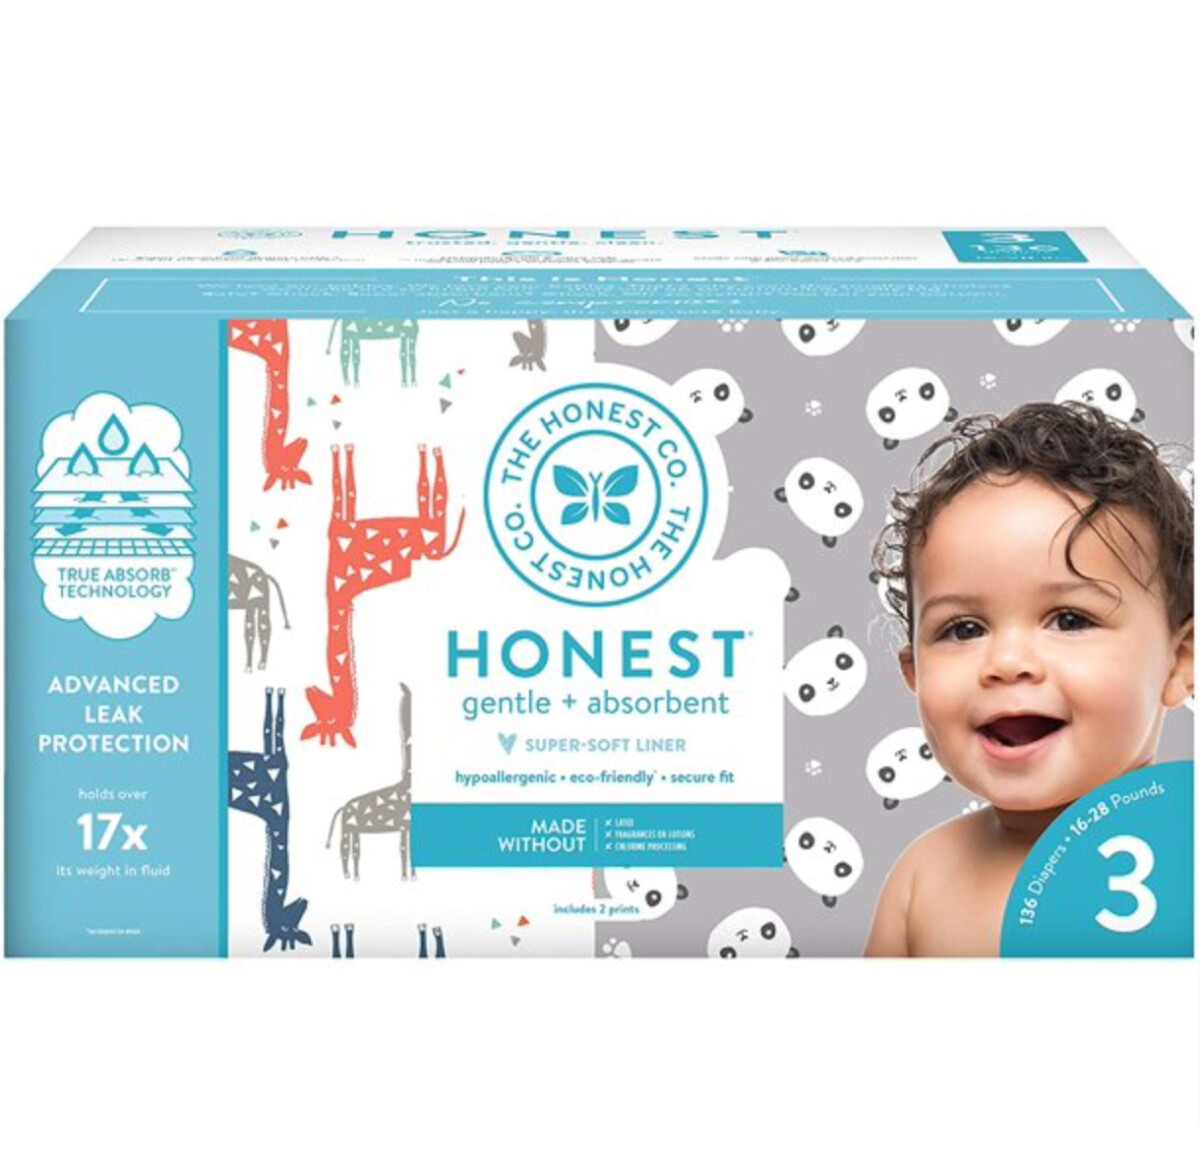 The Honest Company Military Discount